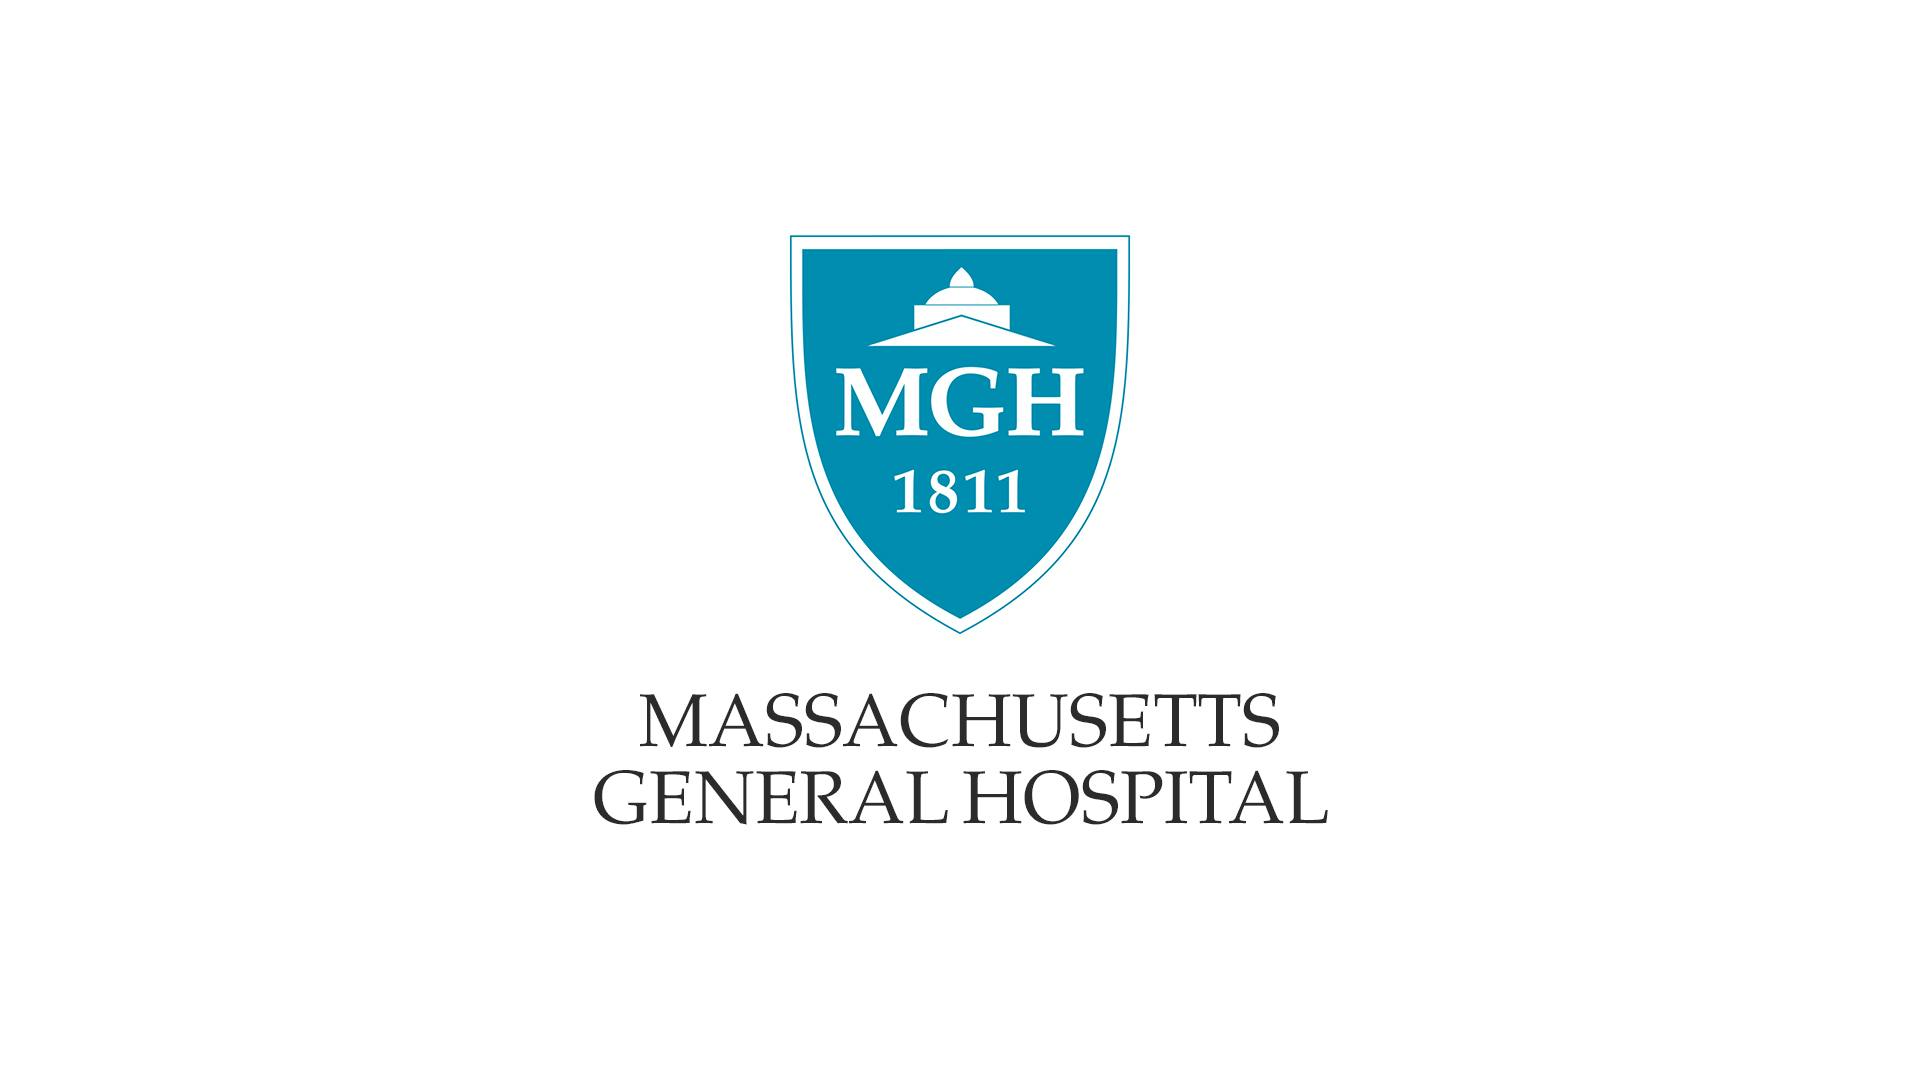 Logo of Massachusetts General Hospital on a white background: a blue shield containing the letters "MGH" and the date 1811.